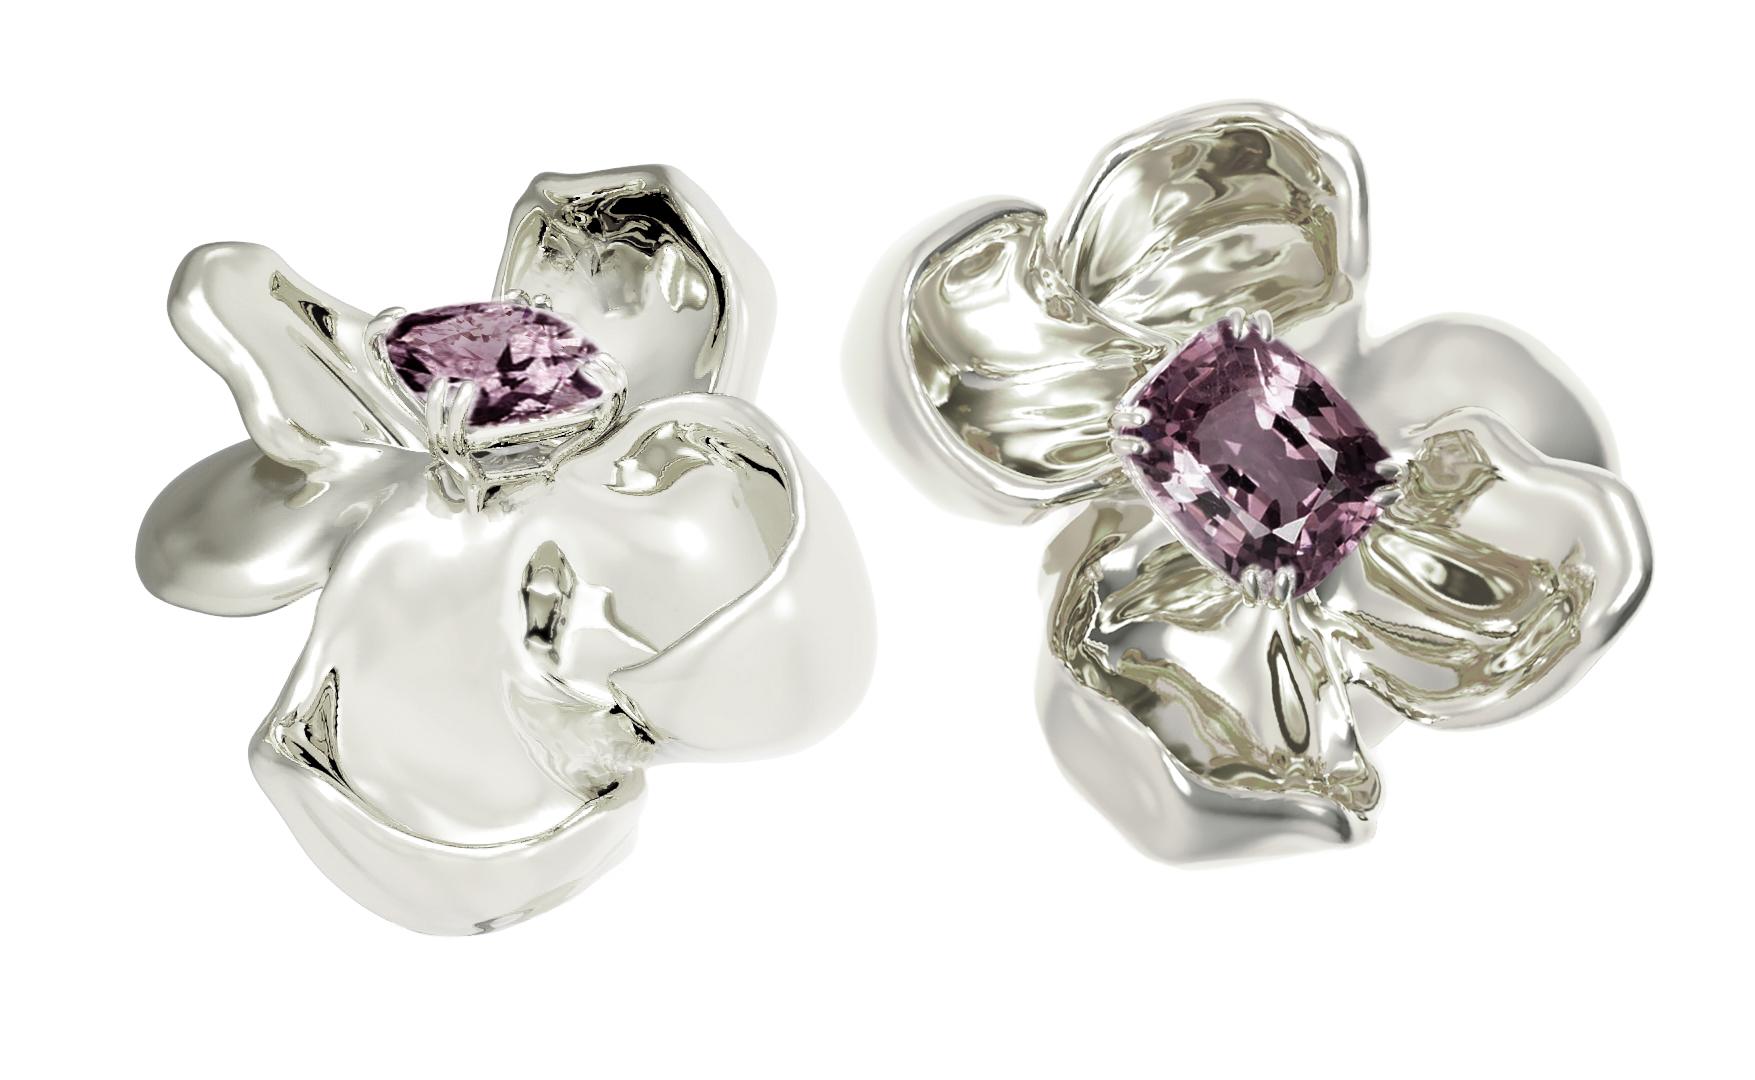 These Magnolia Flower contemporary clip-on earrings are in 18 karat white gold with storm purple cushion spinels (about 3 Cts in total). The tender water-surface of the spinel multiplies the light, mirroring on the golden petals. 

The piece is